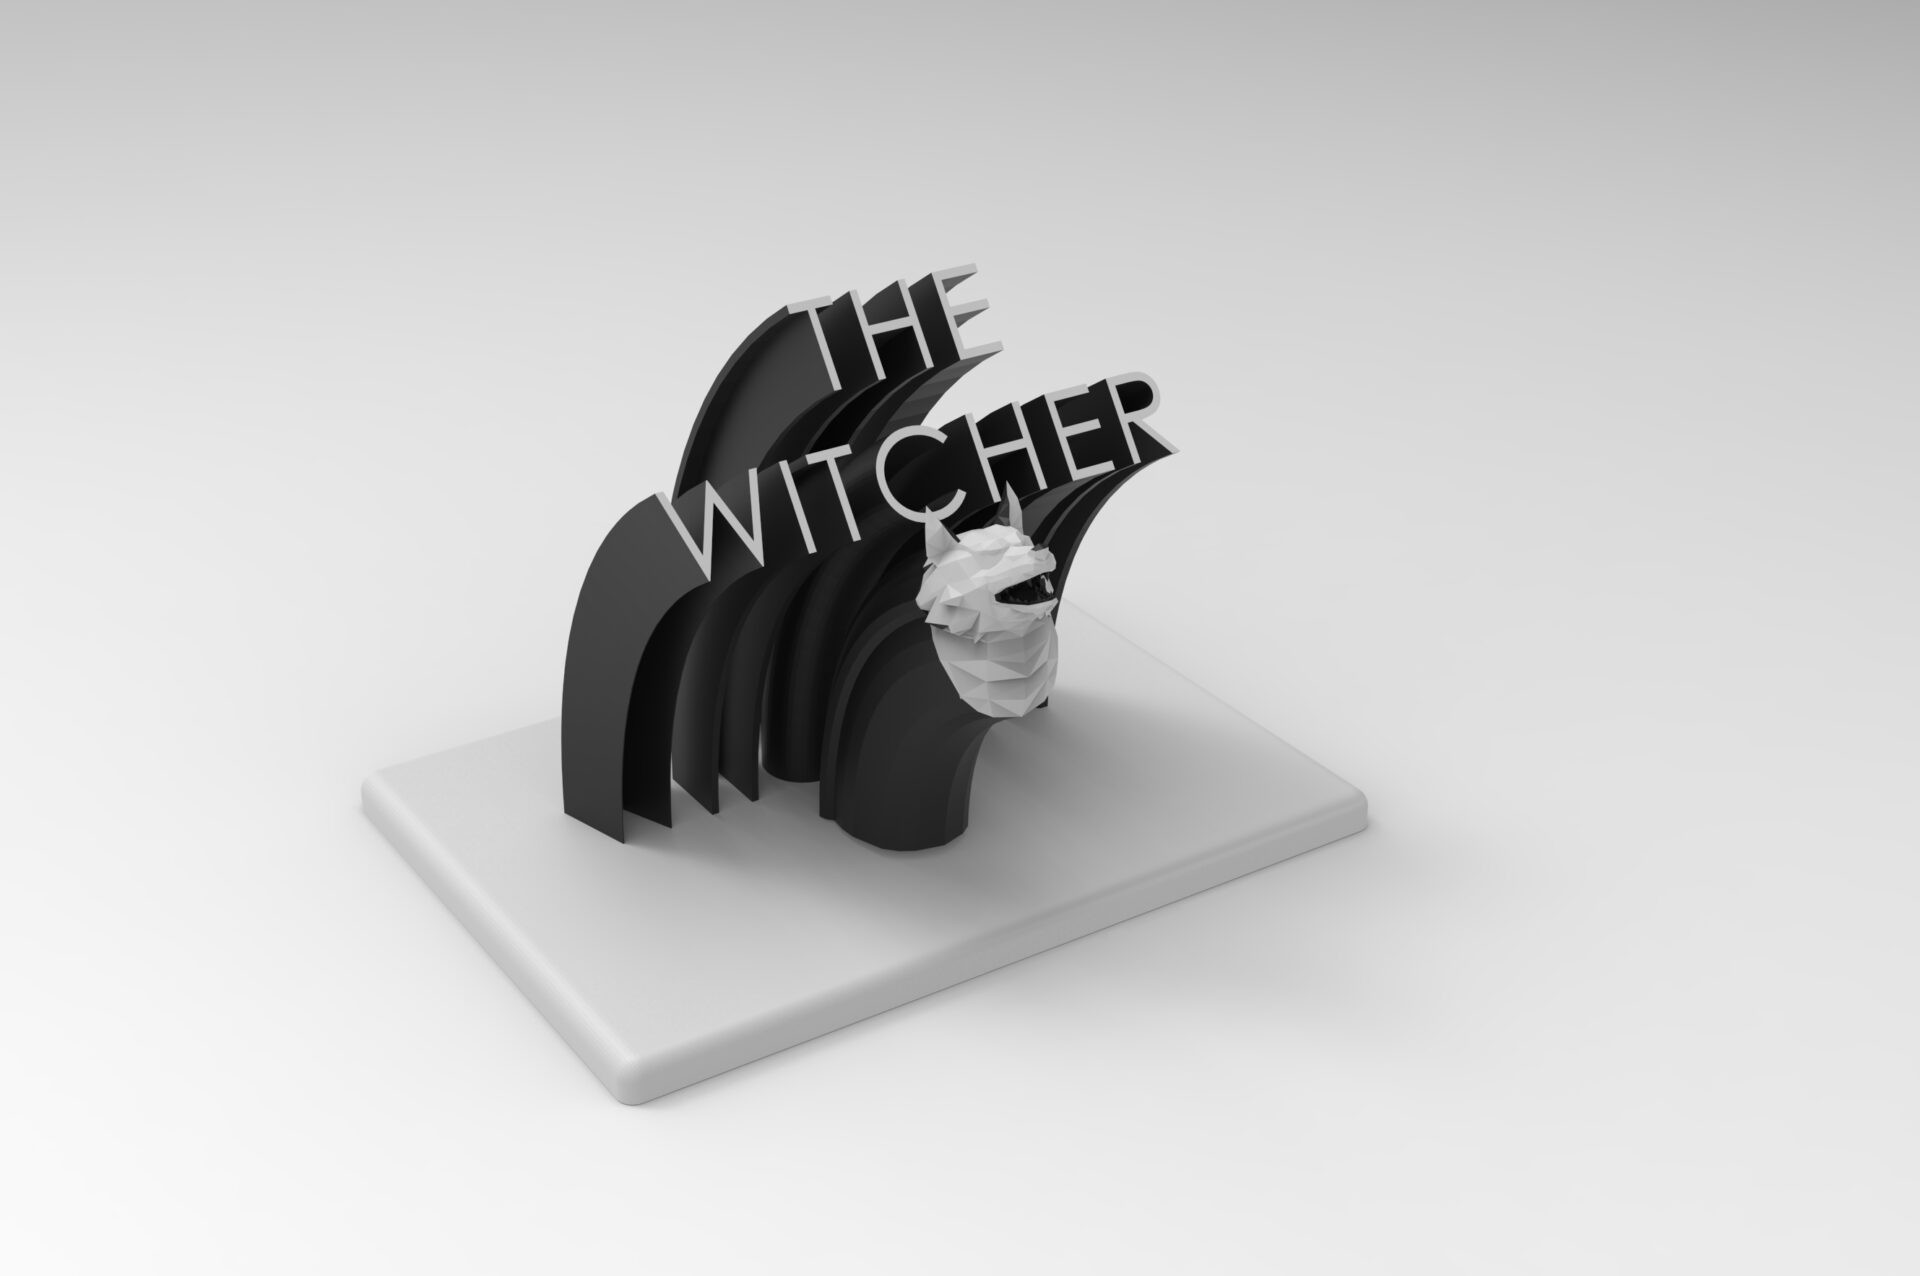 ornament-with-witcher-written